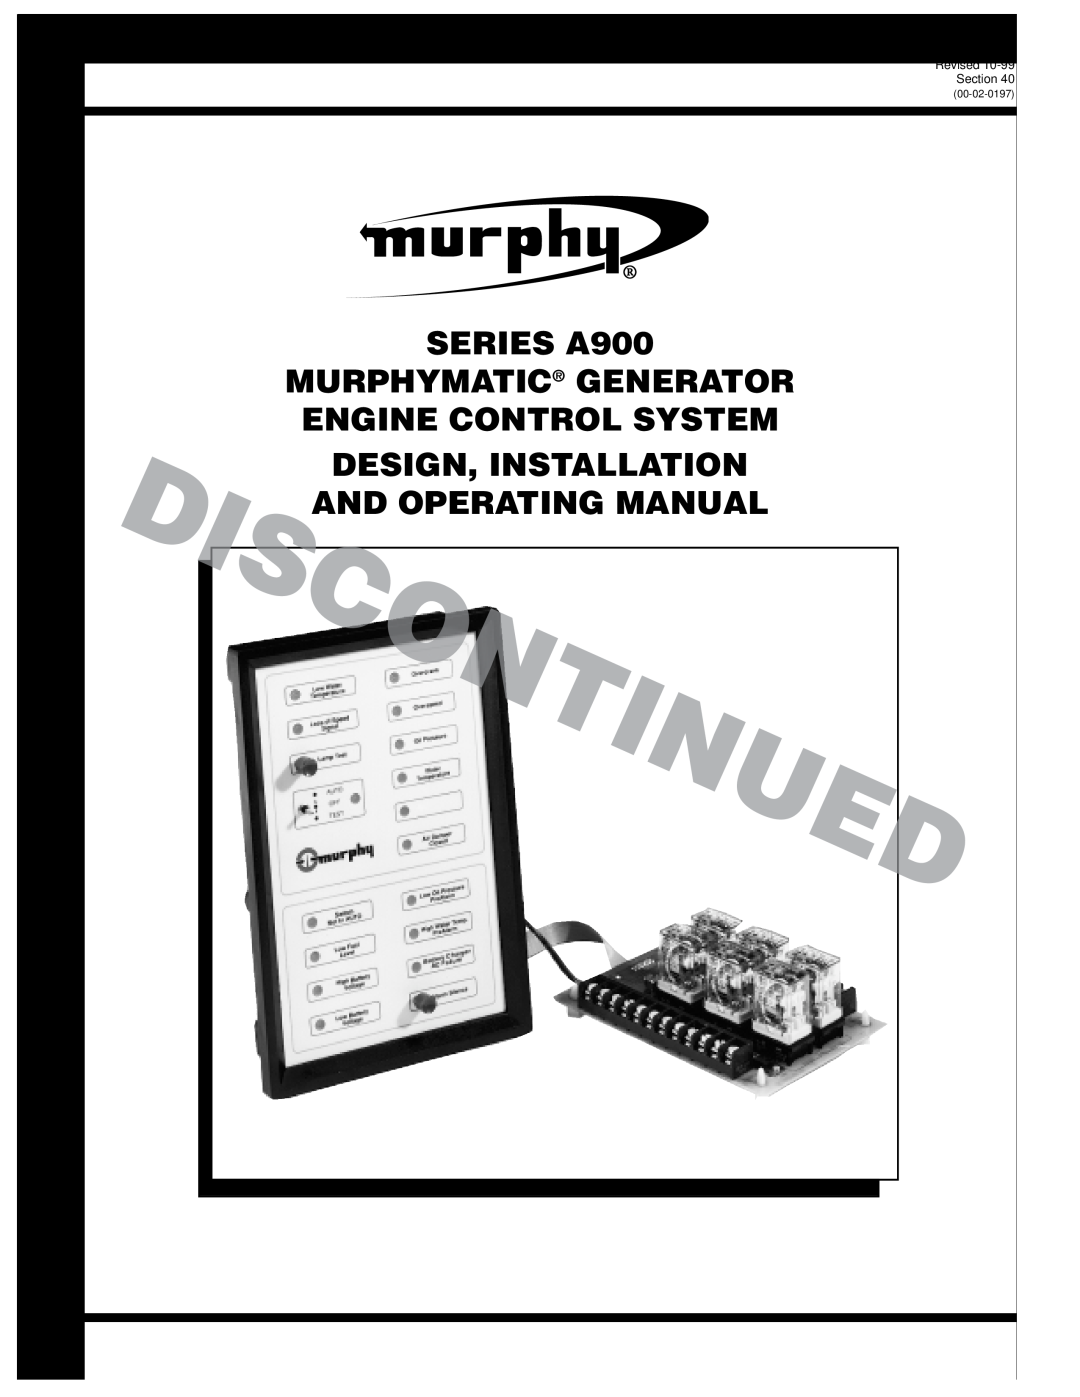 Murphy Series A900 manual SERIES A900 MURPHYMATIC GENERATOR ENGINE CONTROL SYSTEM, A900-9025N Revised Section 